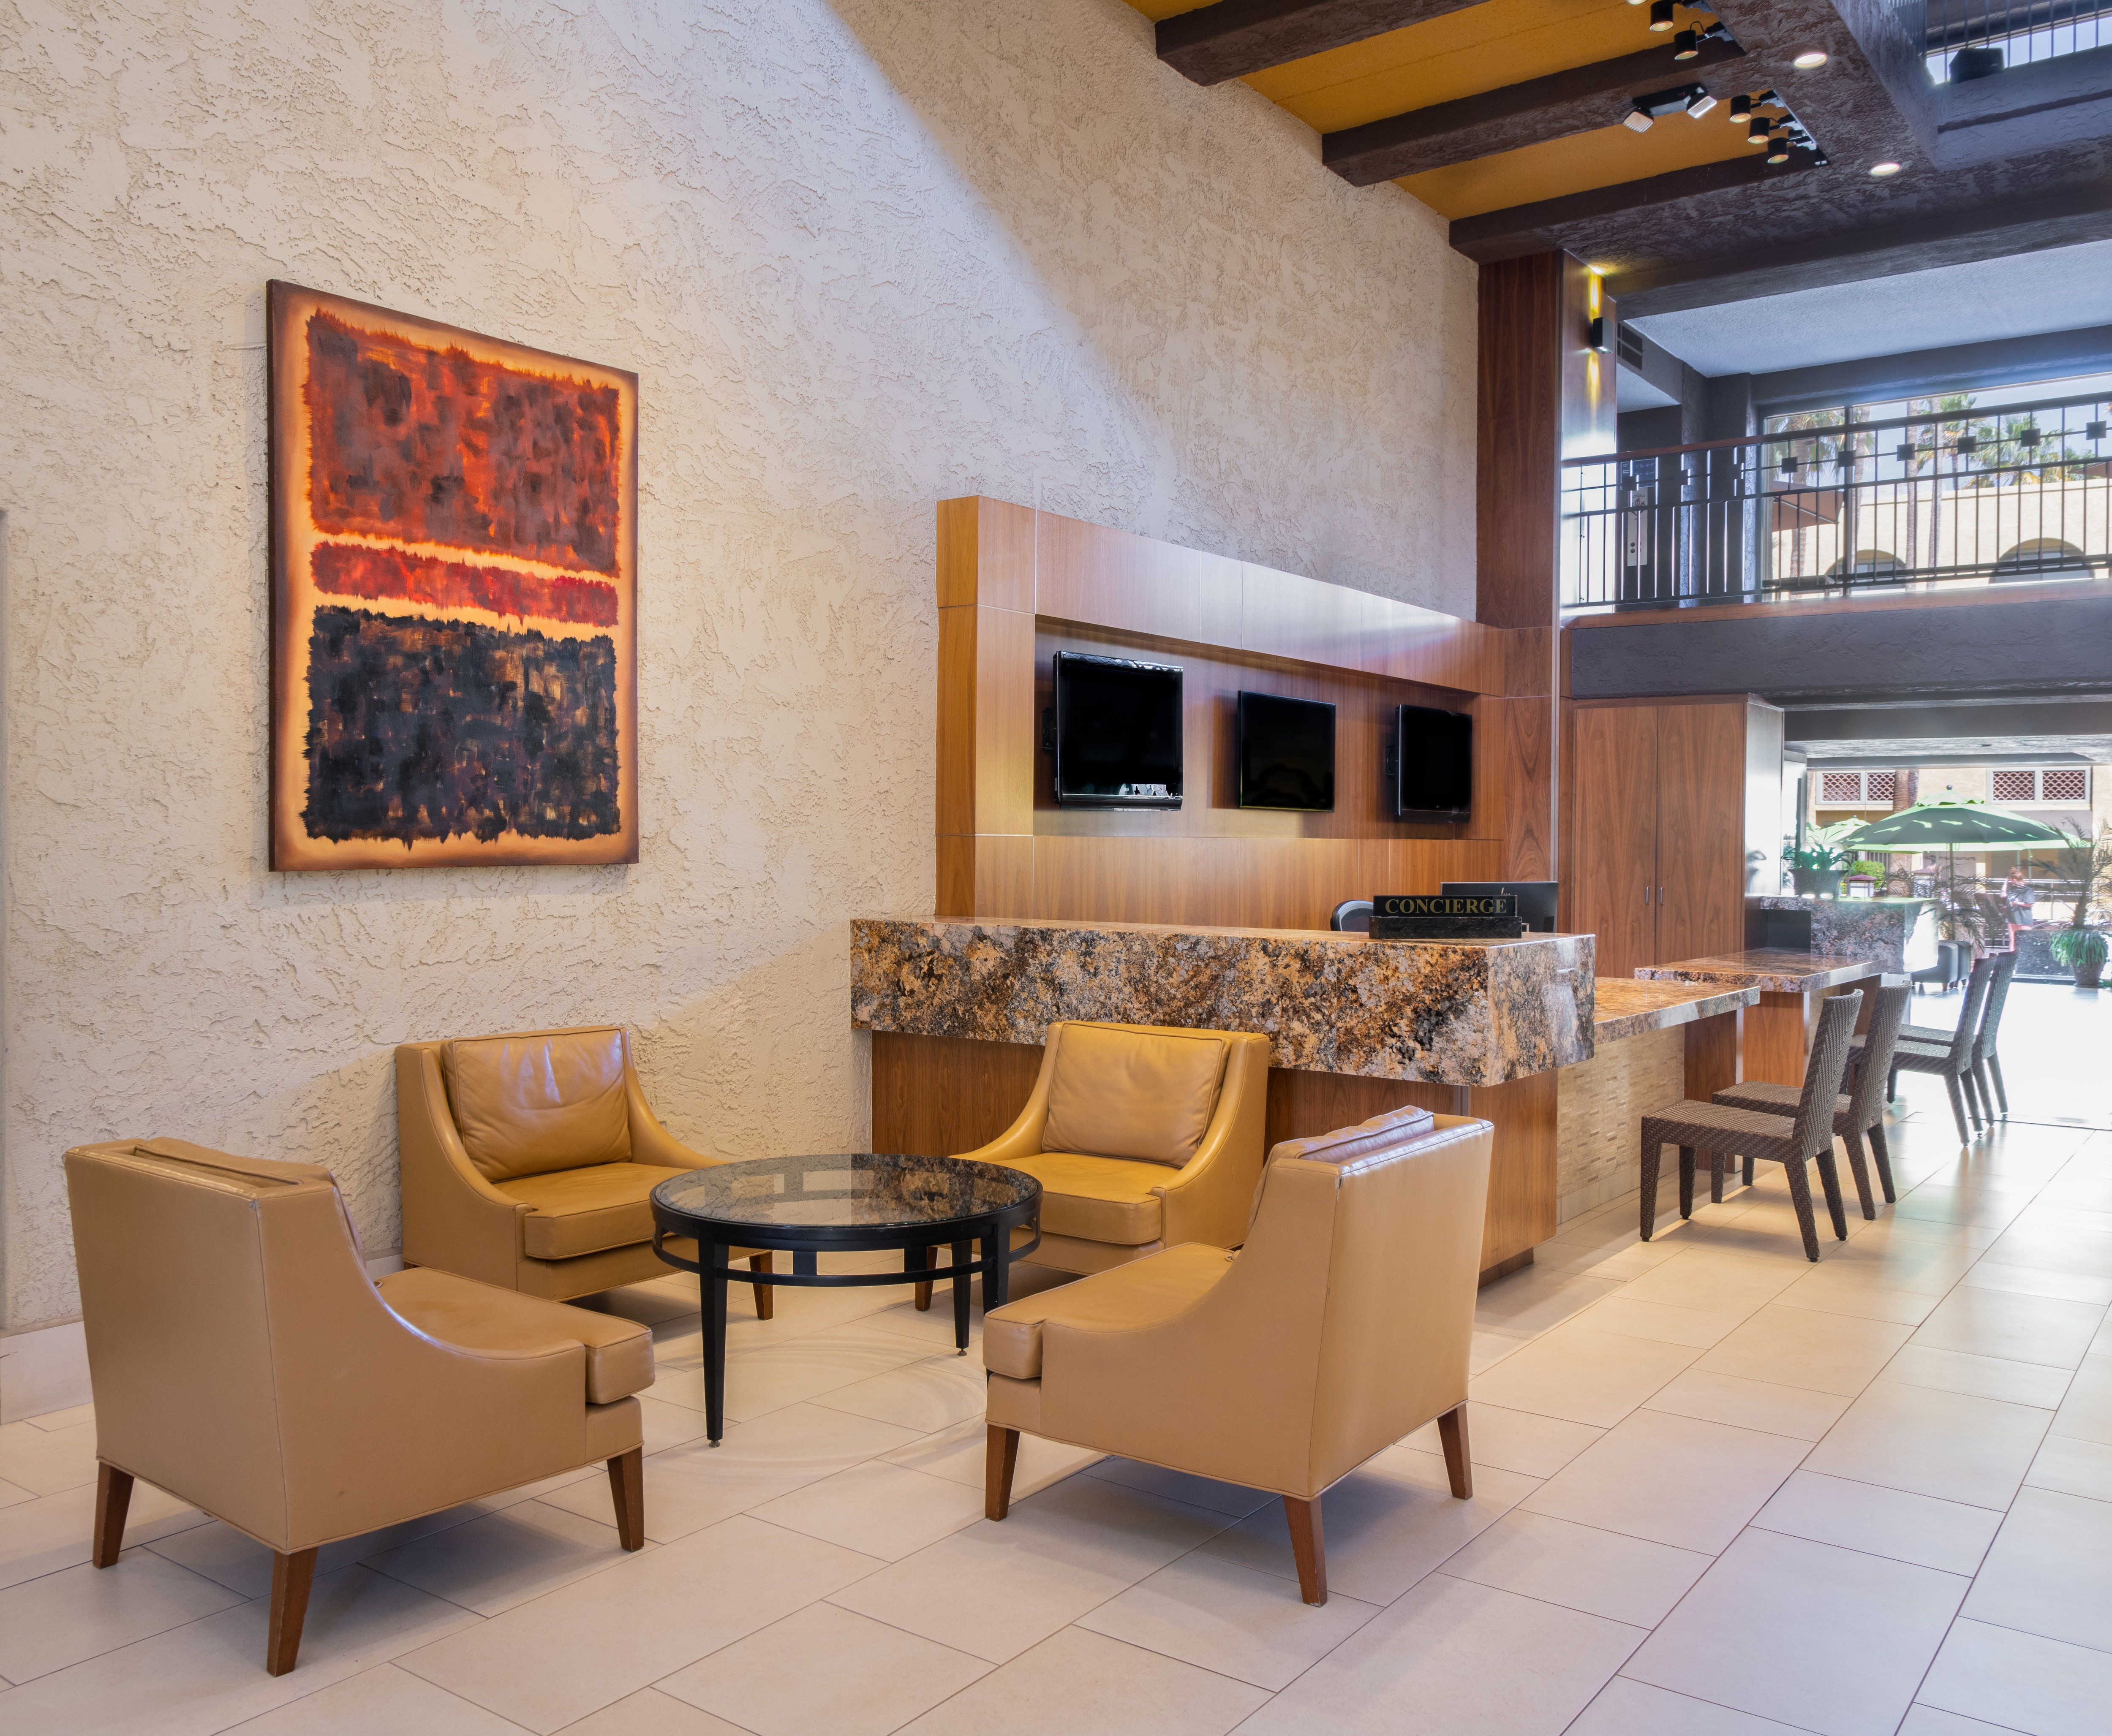 Seating area in lobby with table and chairs